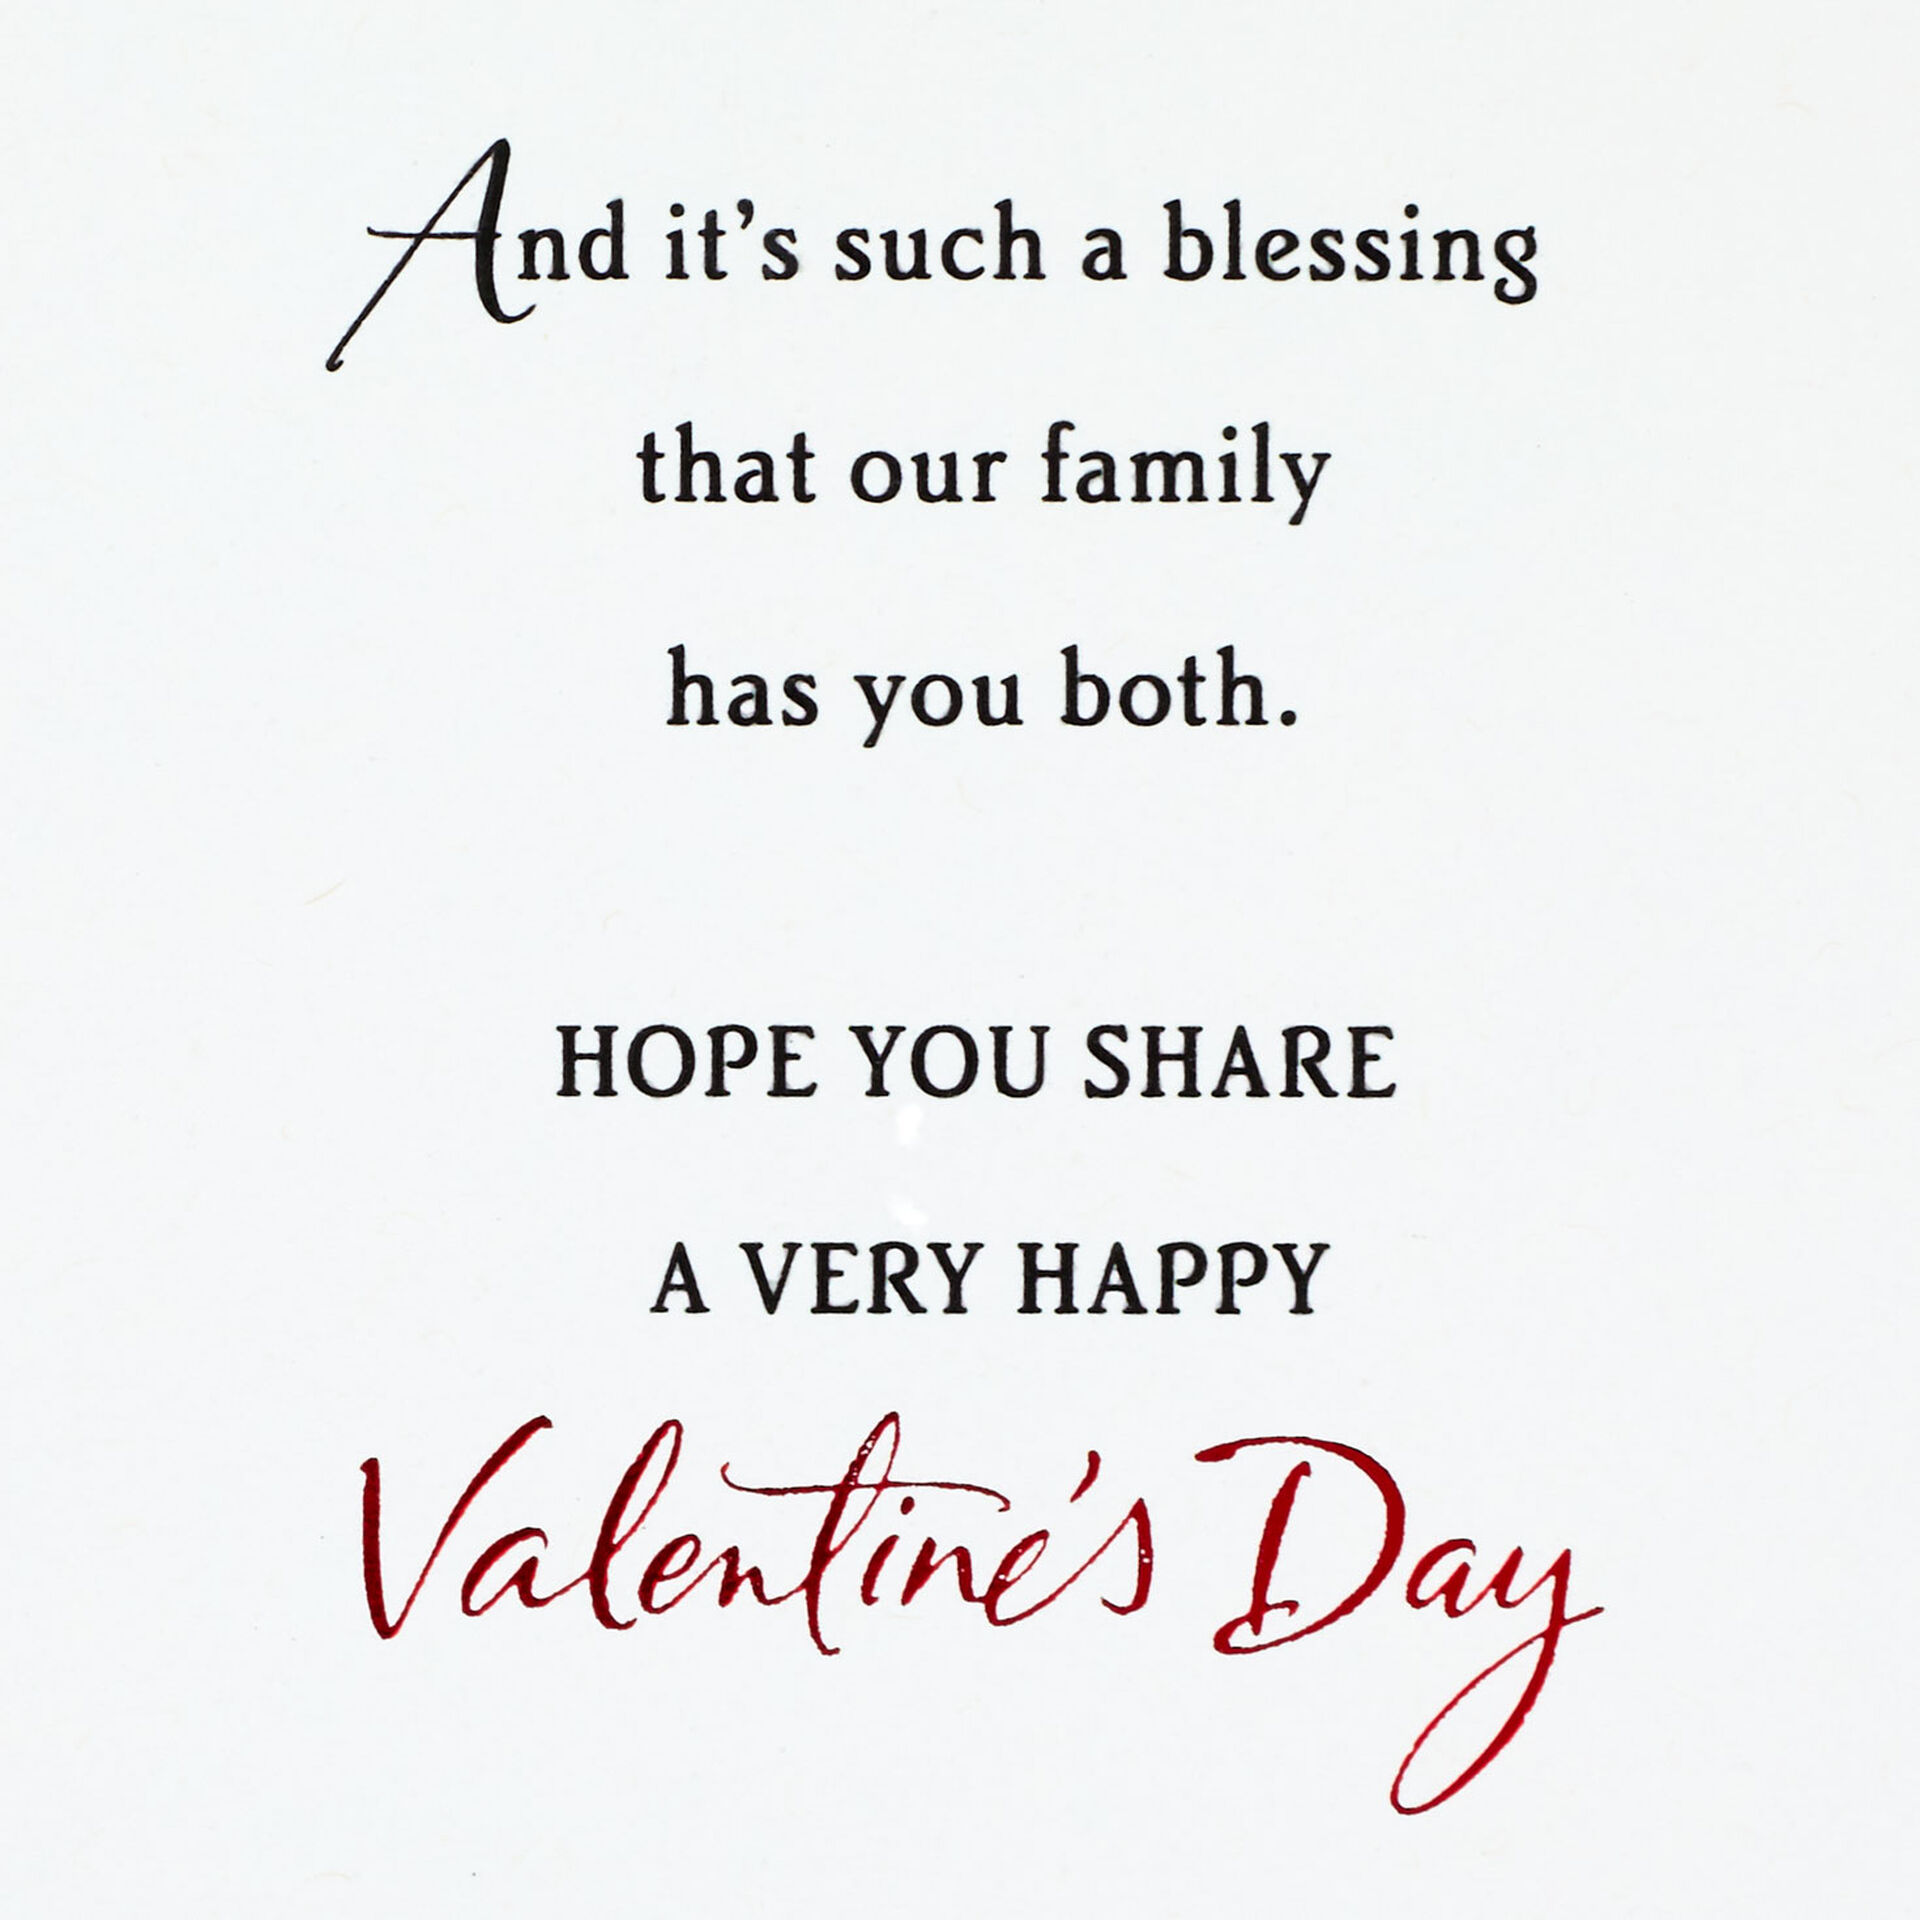 you-re-a-blessing-valentine-s-day-card-for-son-and-his-wife-greeting